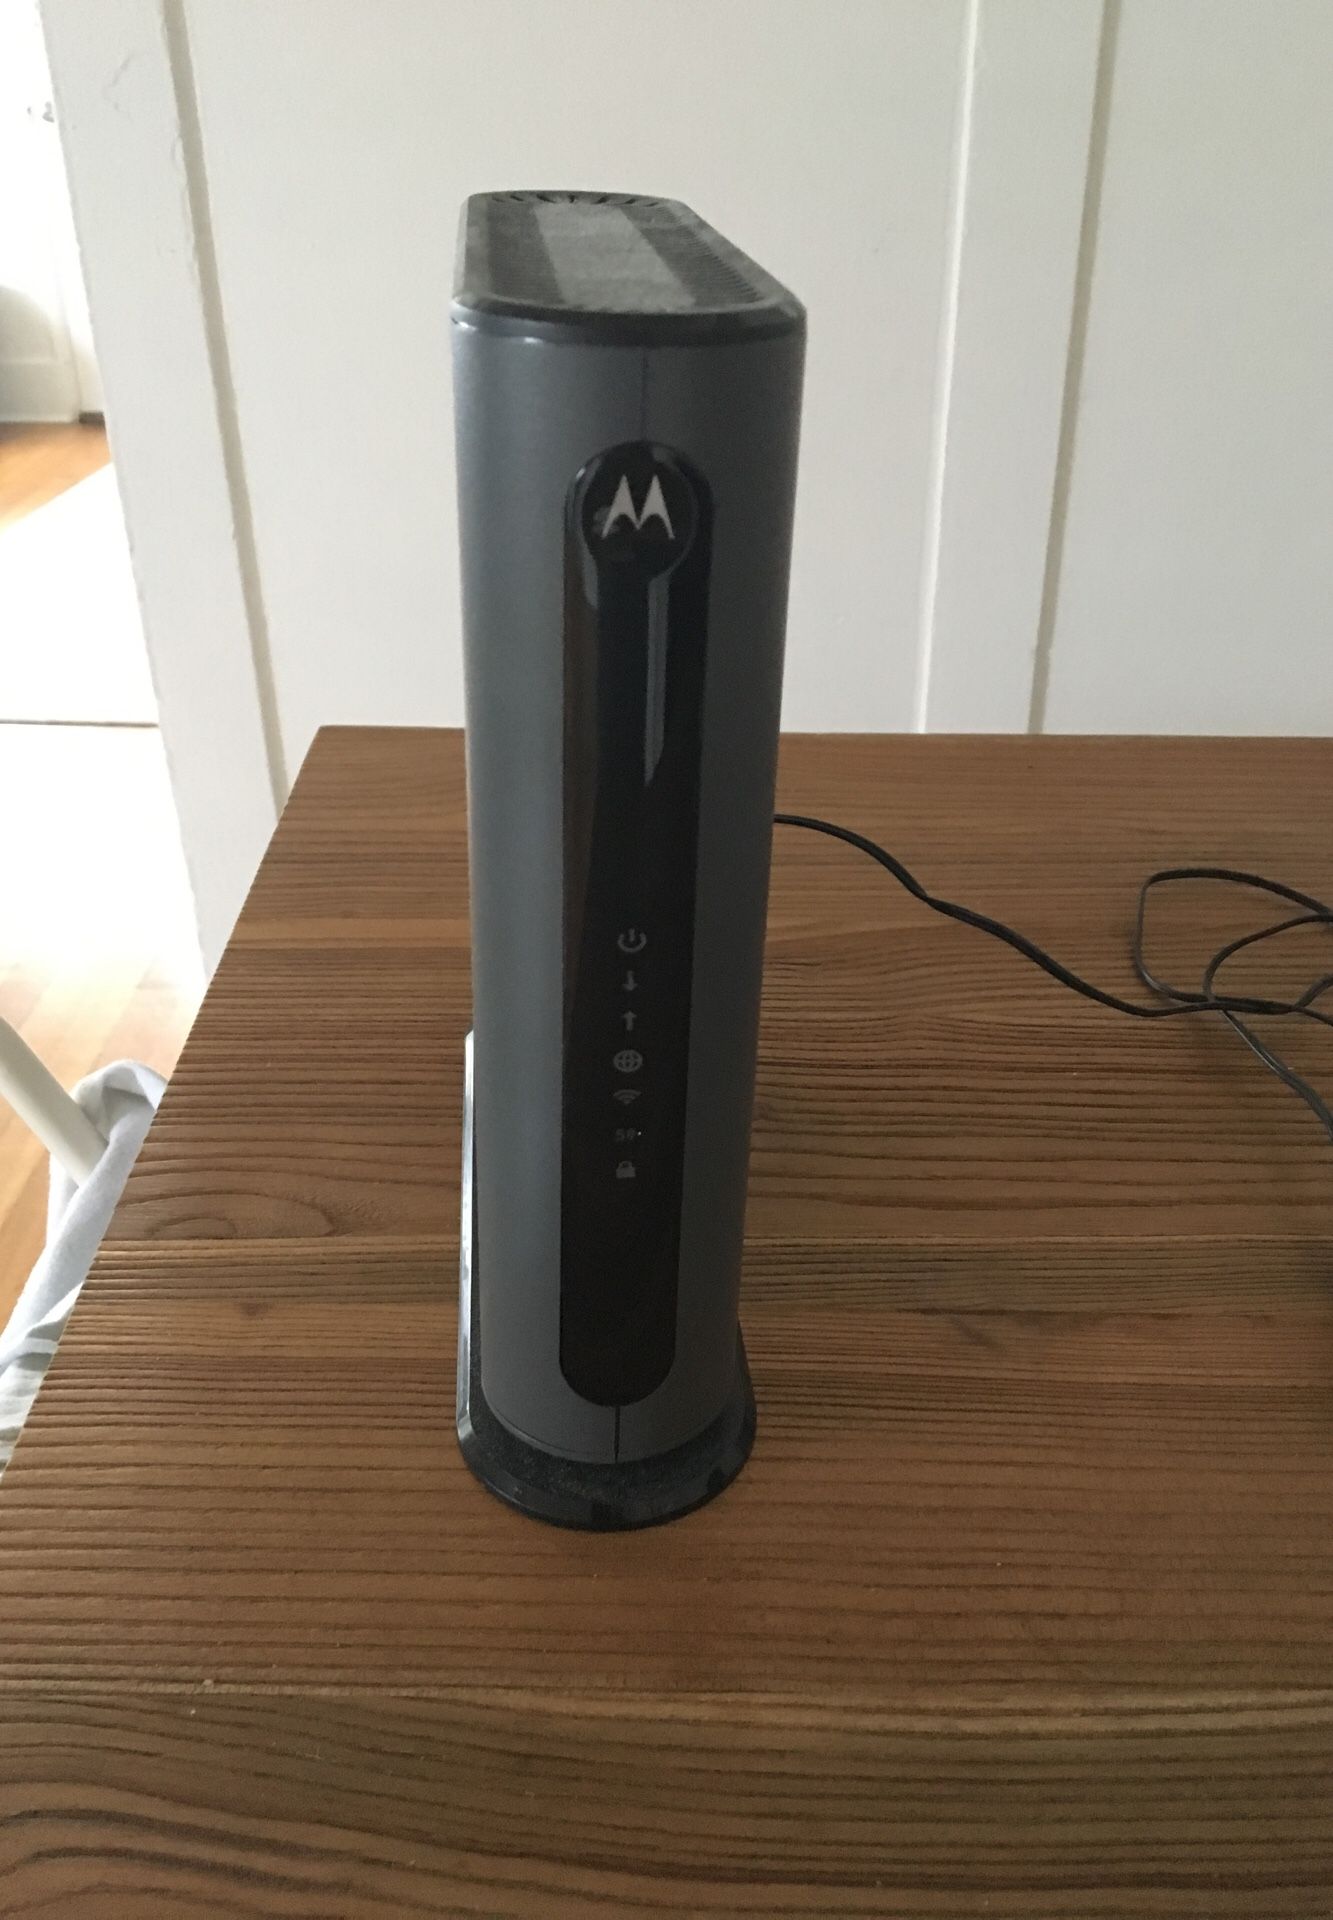 Motorola MG7540 modem and router